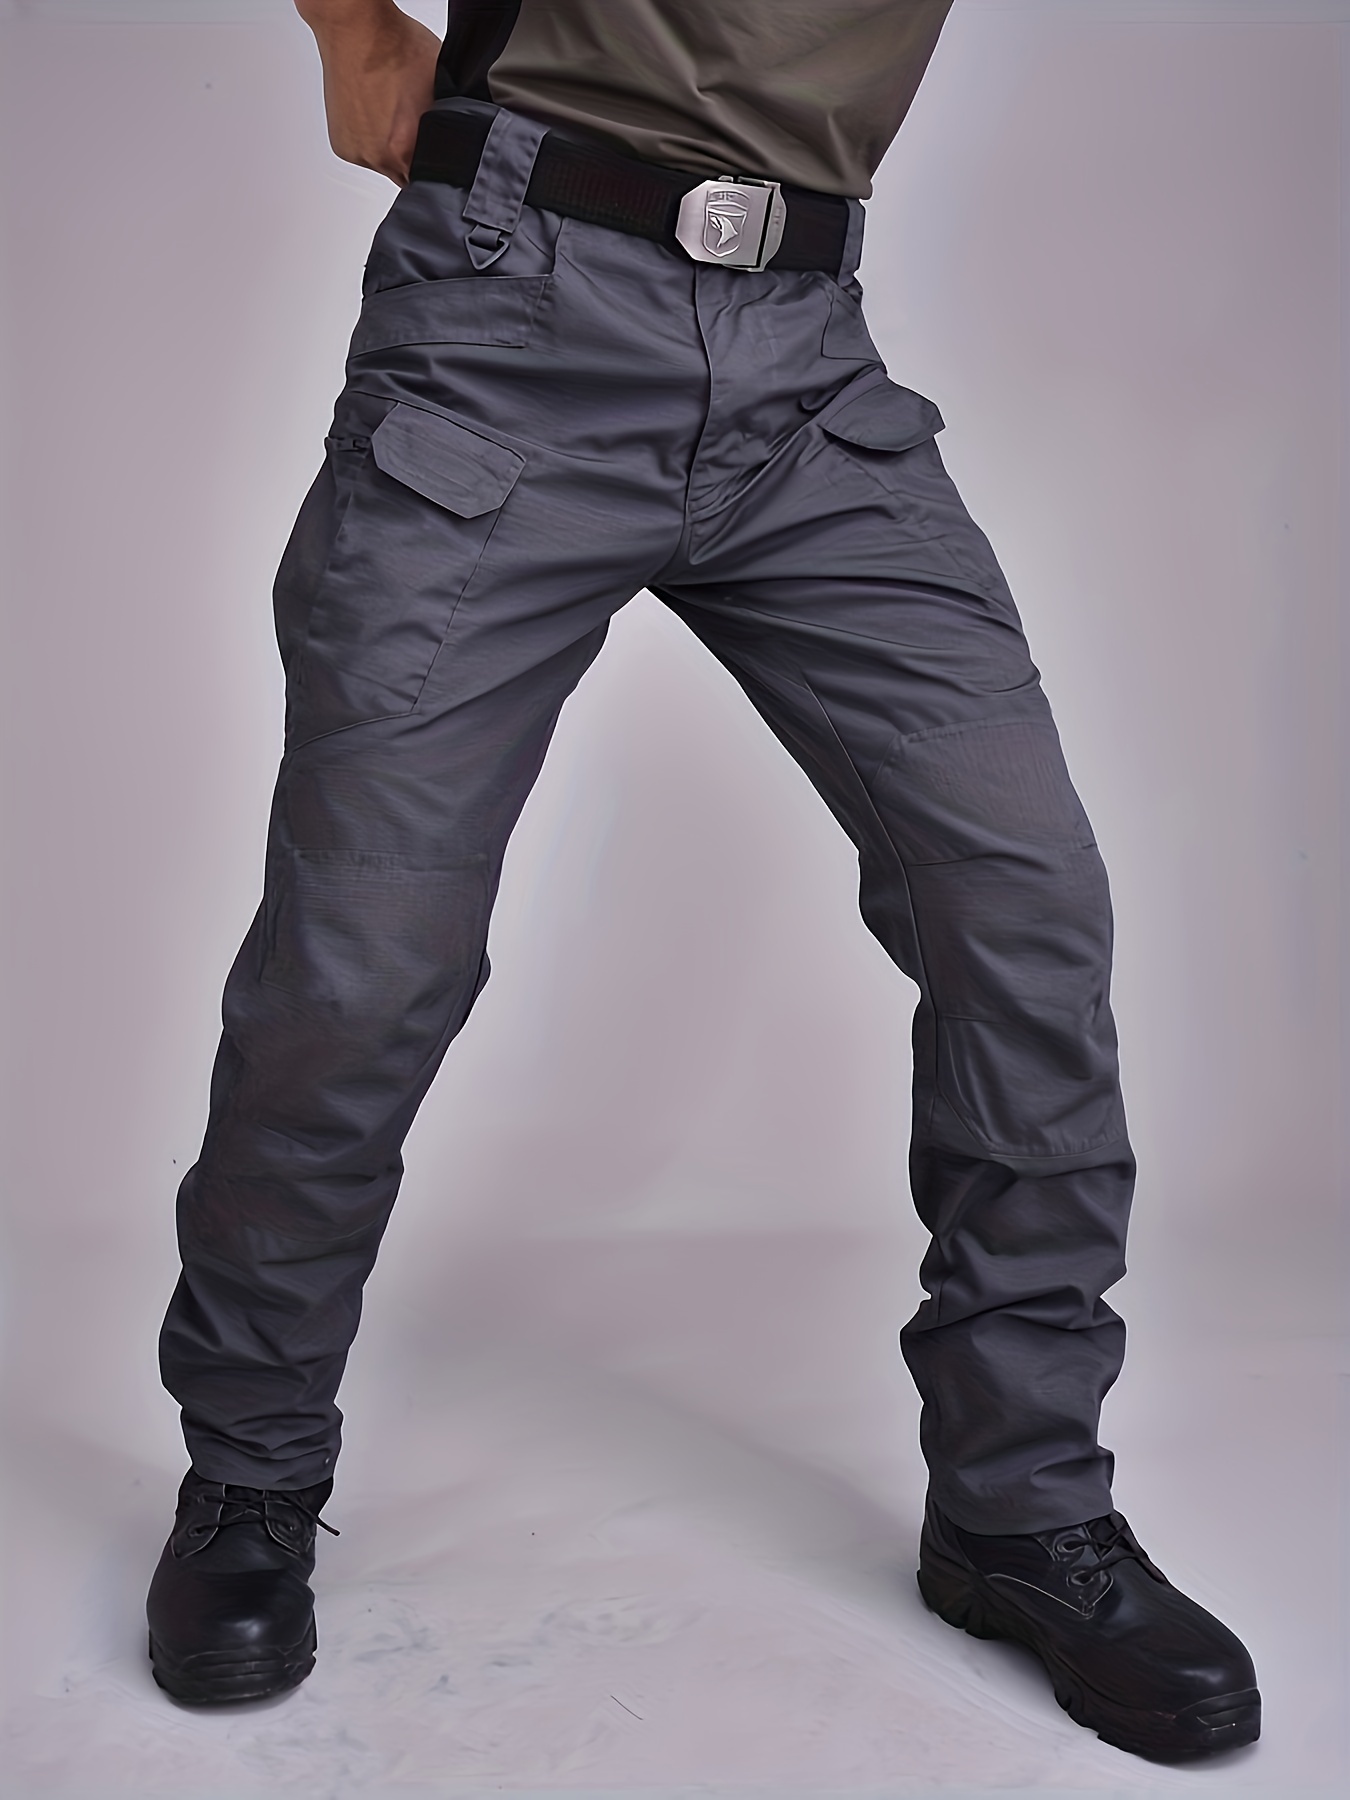 Champion Global Explorer Pant. 2 - Colours Army, Black - Big and Tall  London's Menswear - The Best in Big and Tall